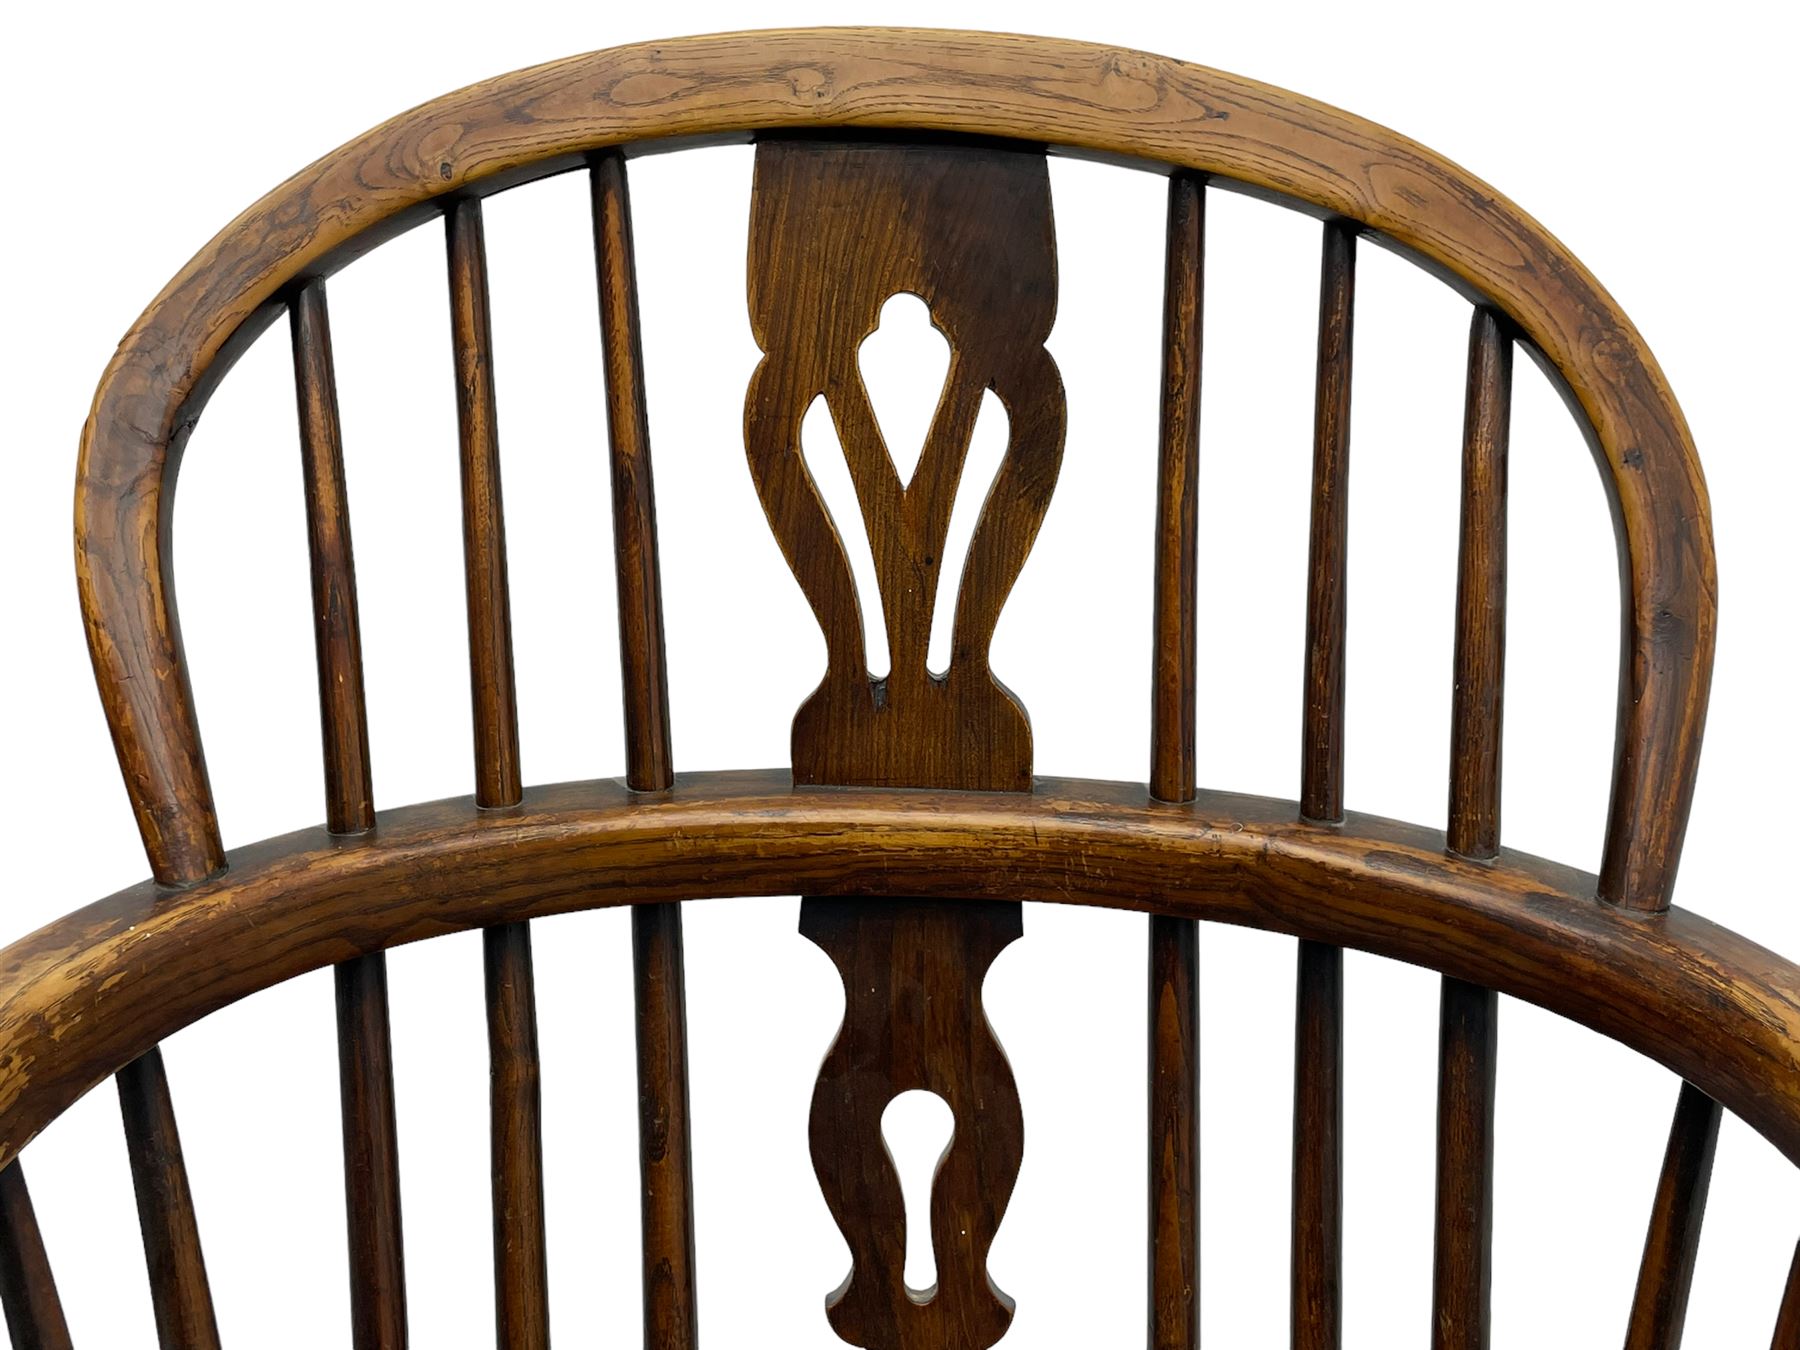 19th century elm and ash Windsor armchair - Image 4 of 6